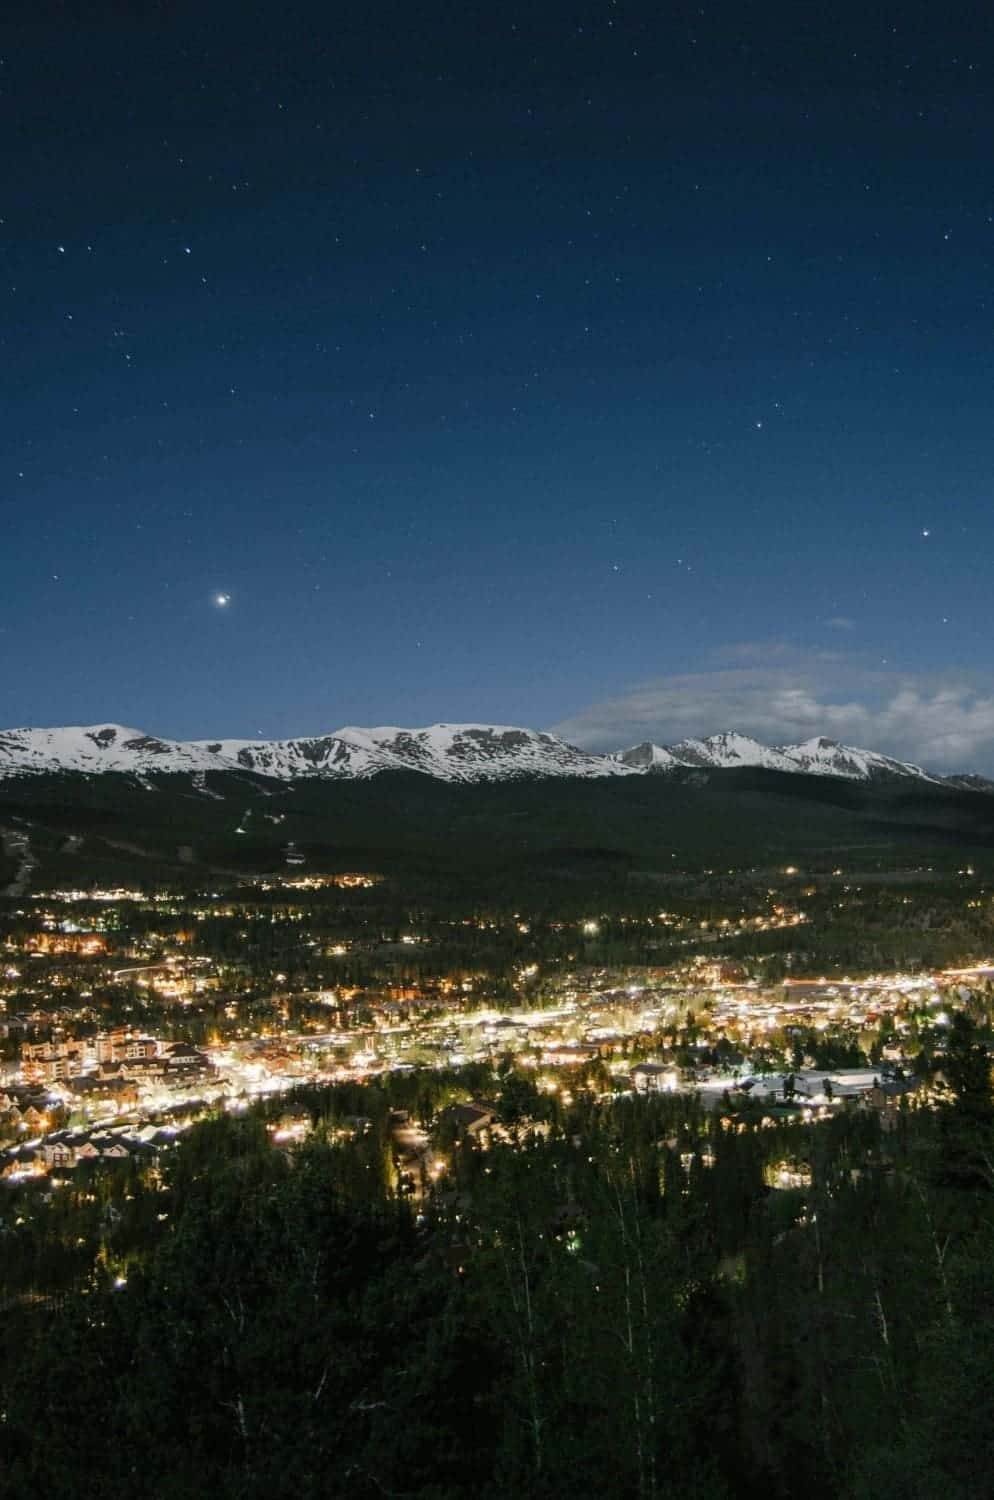 Best Mountain Towns in Colorado